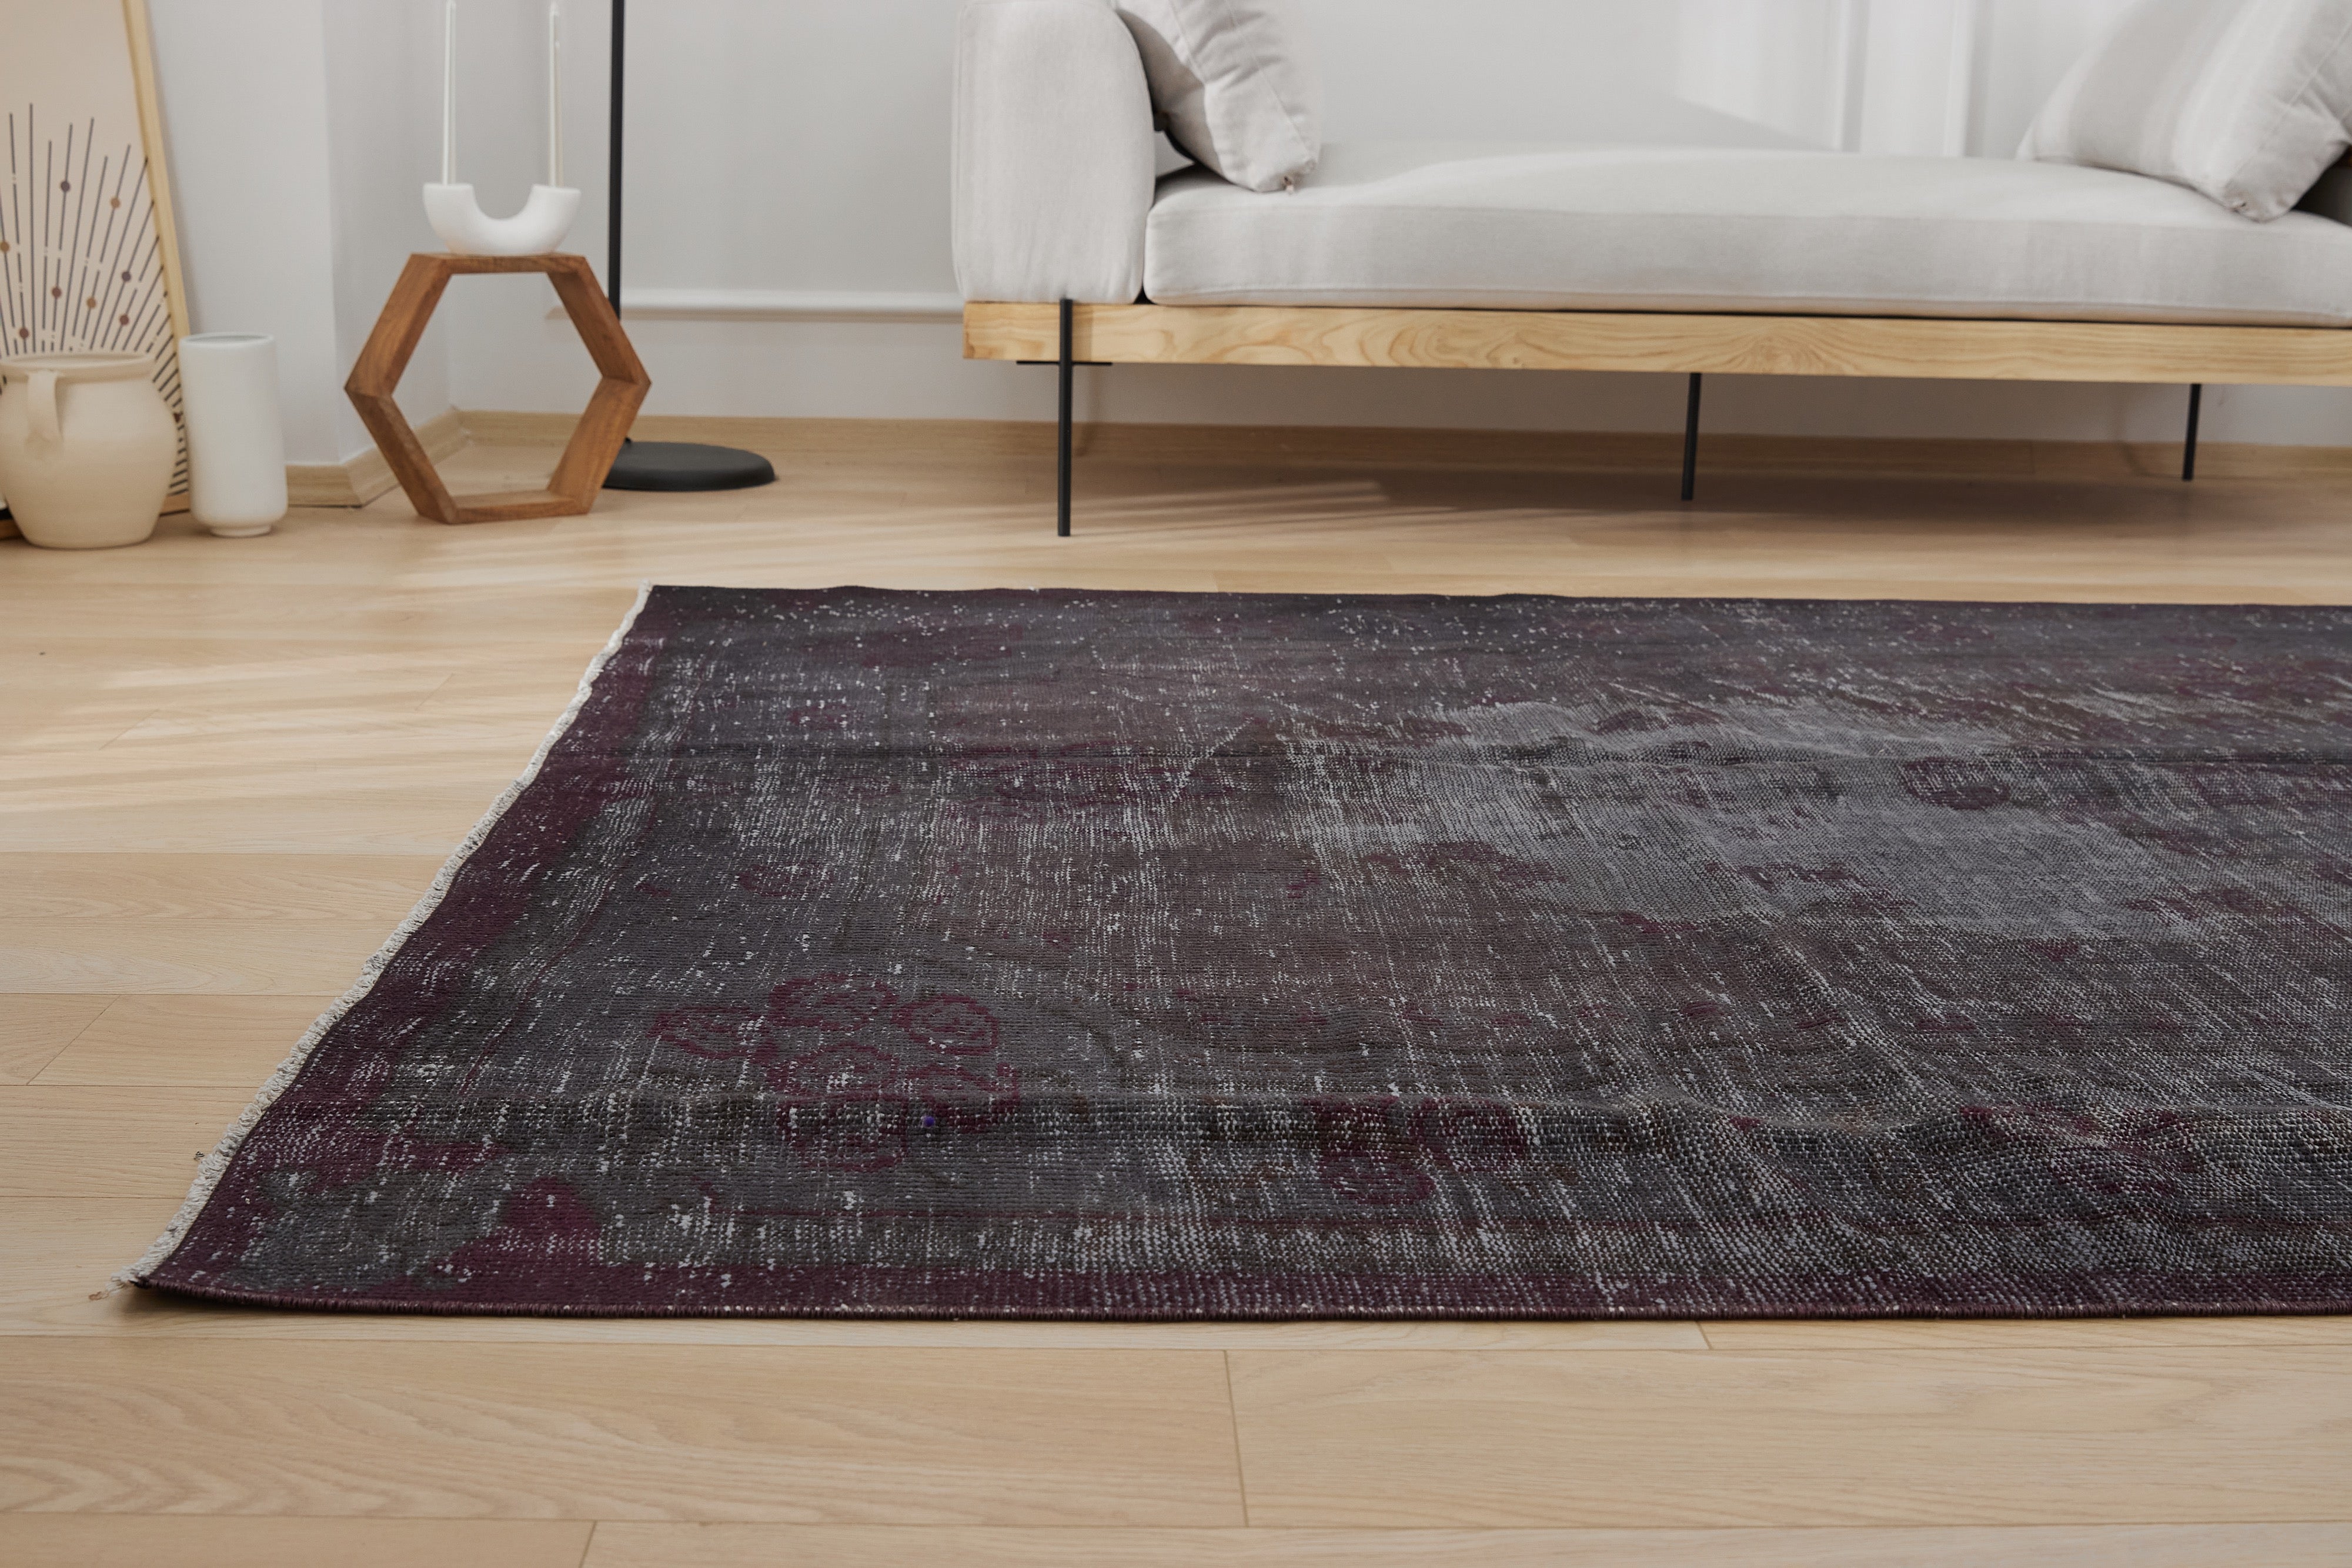 Hand-knotted Heritage: Emmaline's Legacy | Kuden Rugs